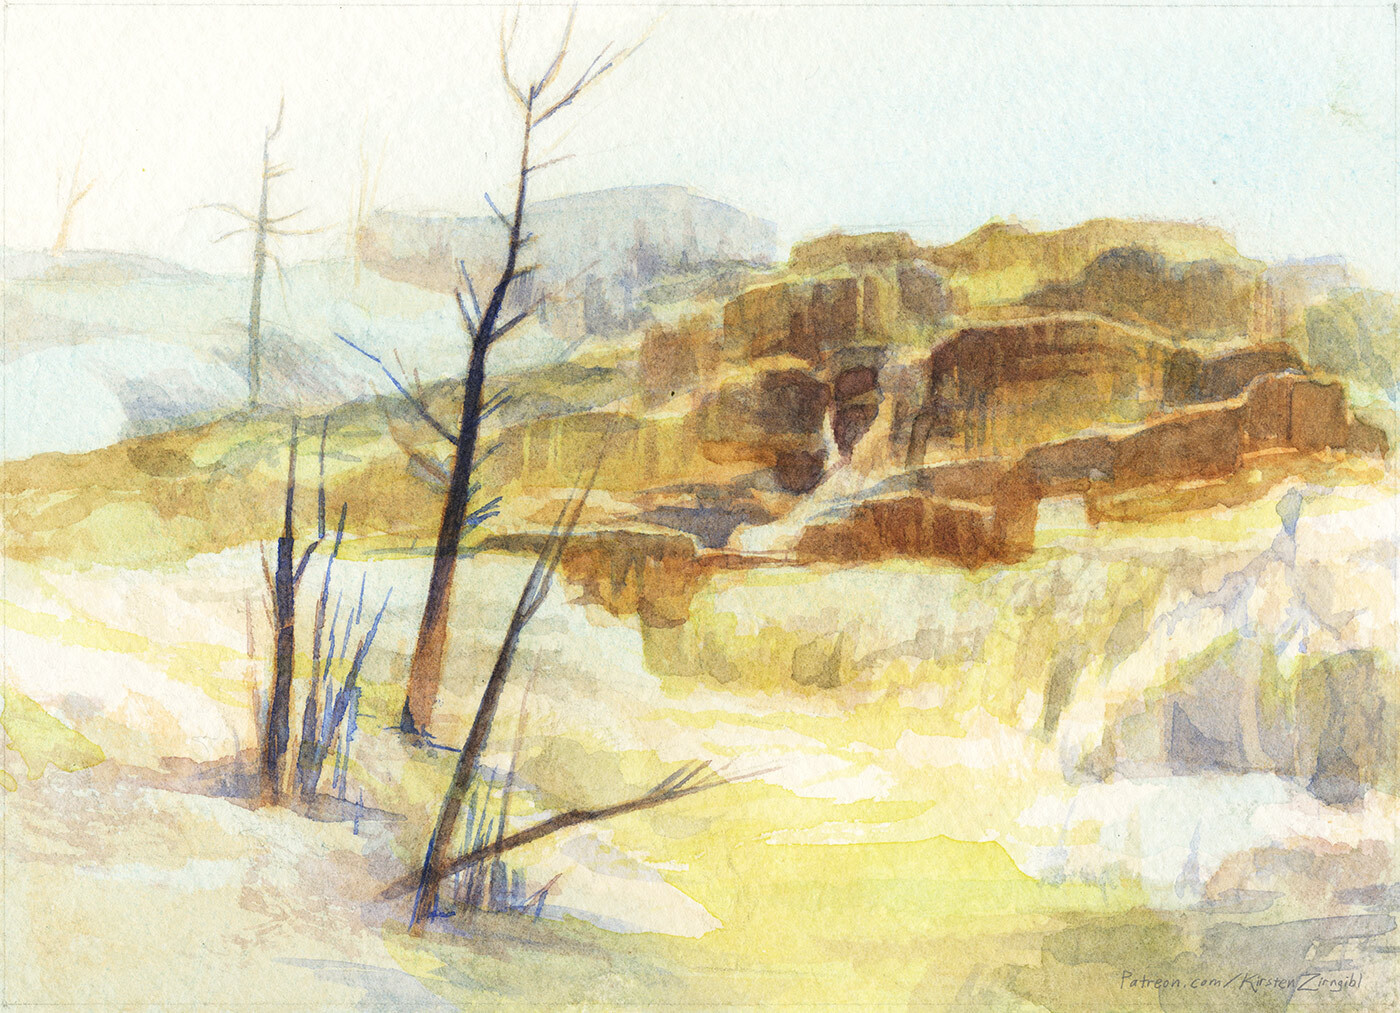 Watercolor study of Mammoth Hot Springs at Yellowstone National Park.  2019